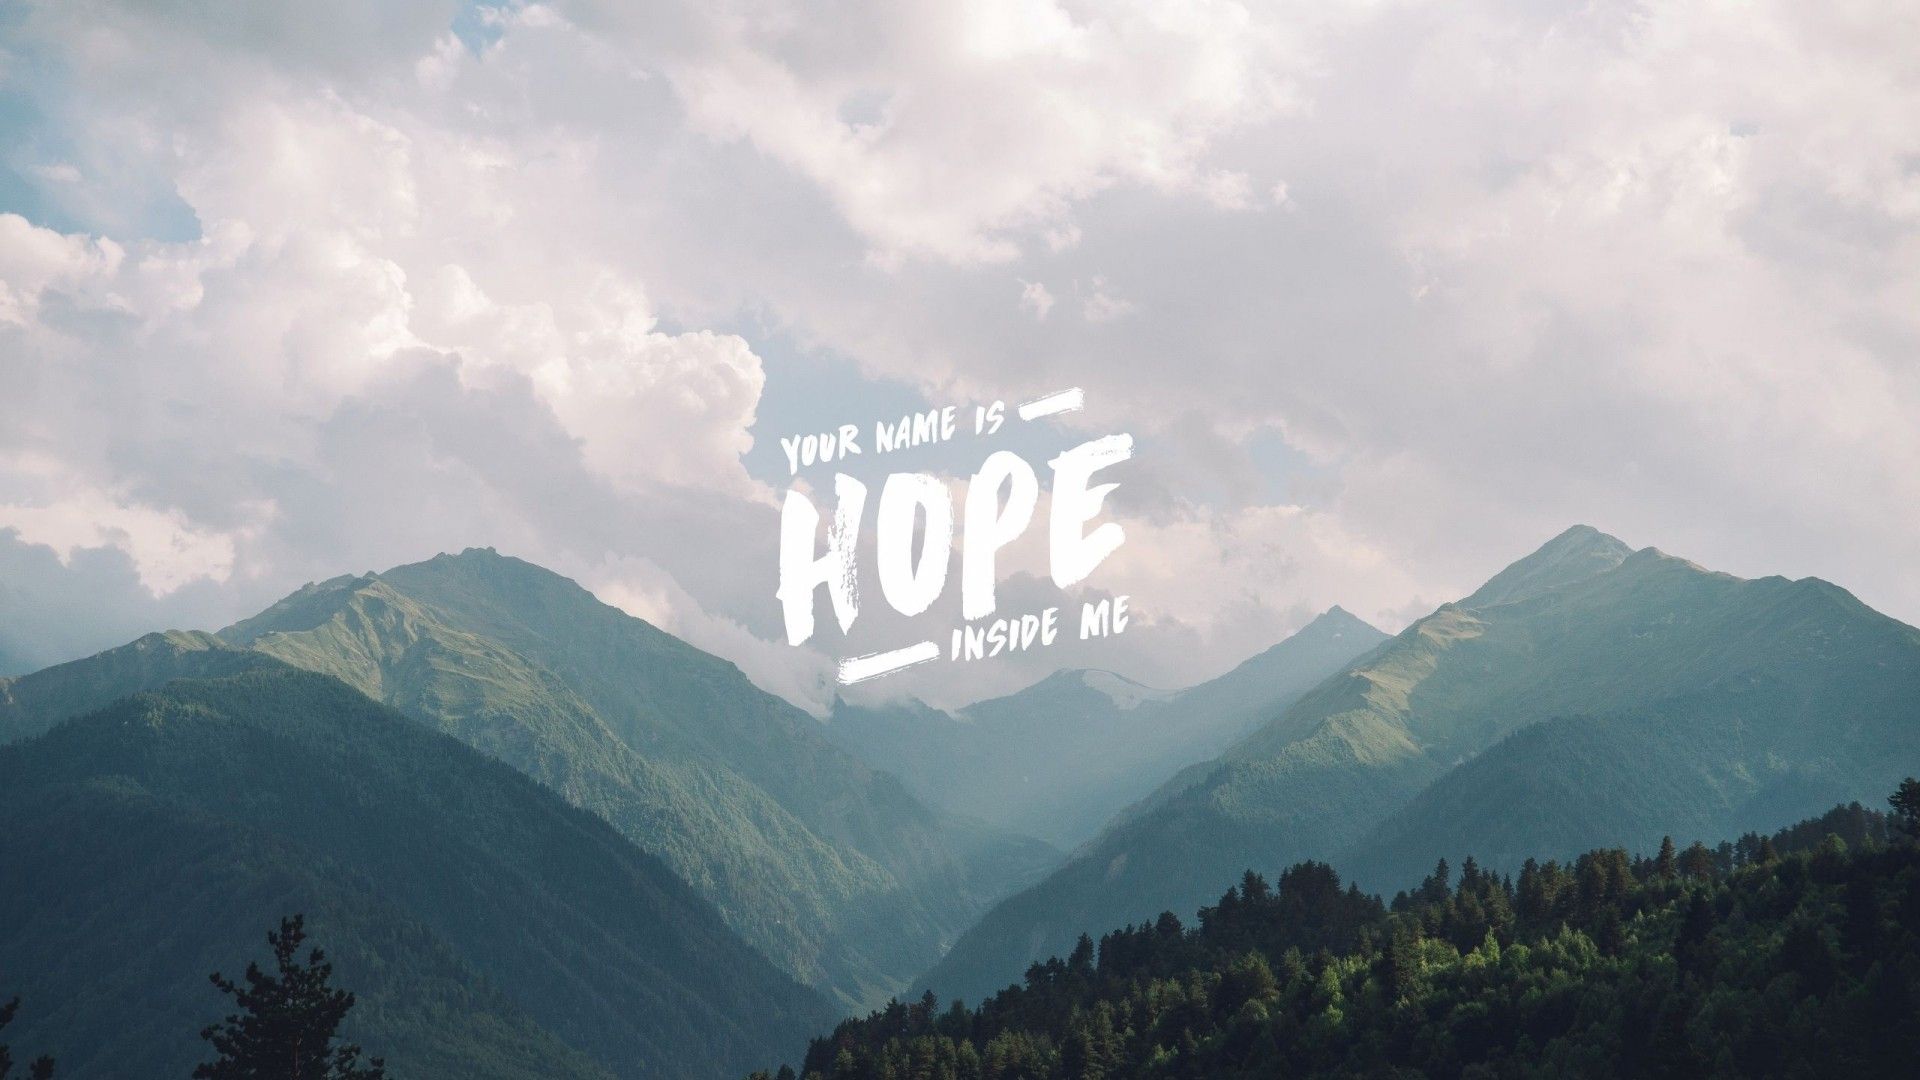 Your name is hope inside me. - BTS